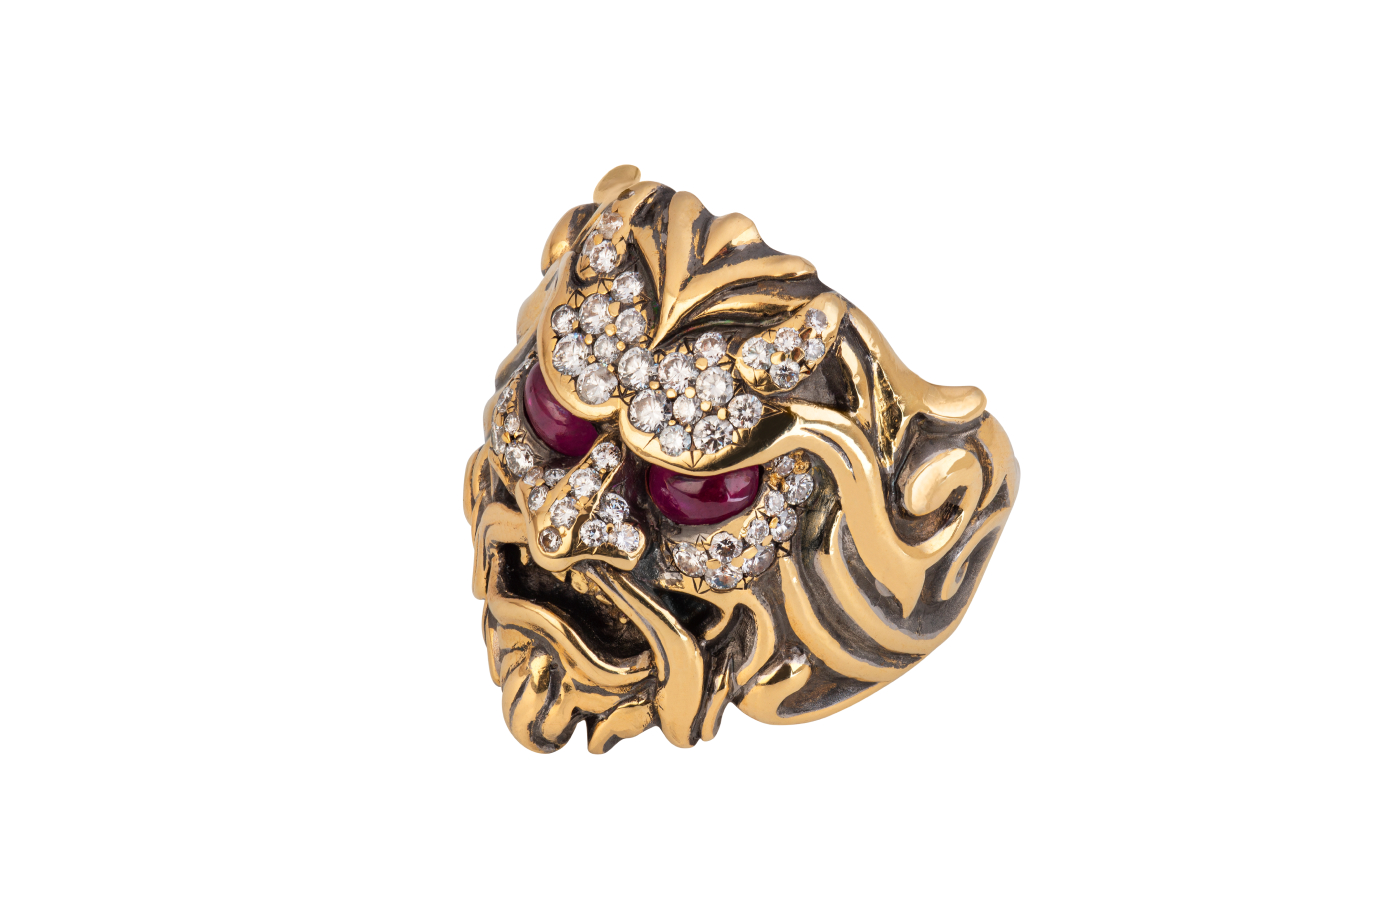 Stephen Webster Kabuki Mask ring in gold, ruby and diamond